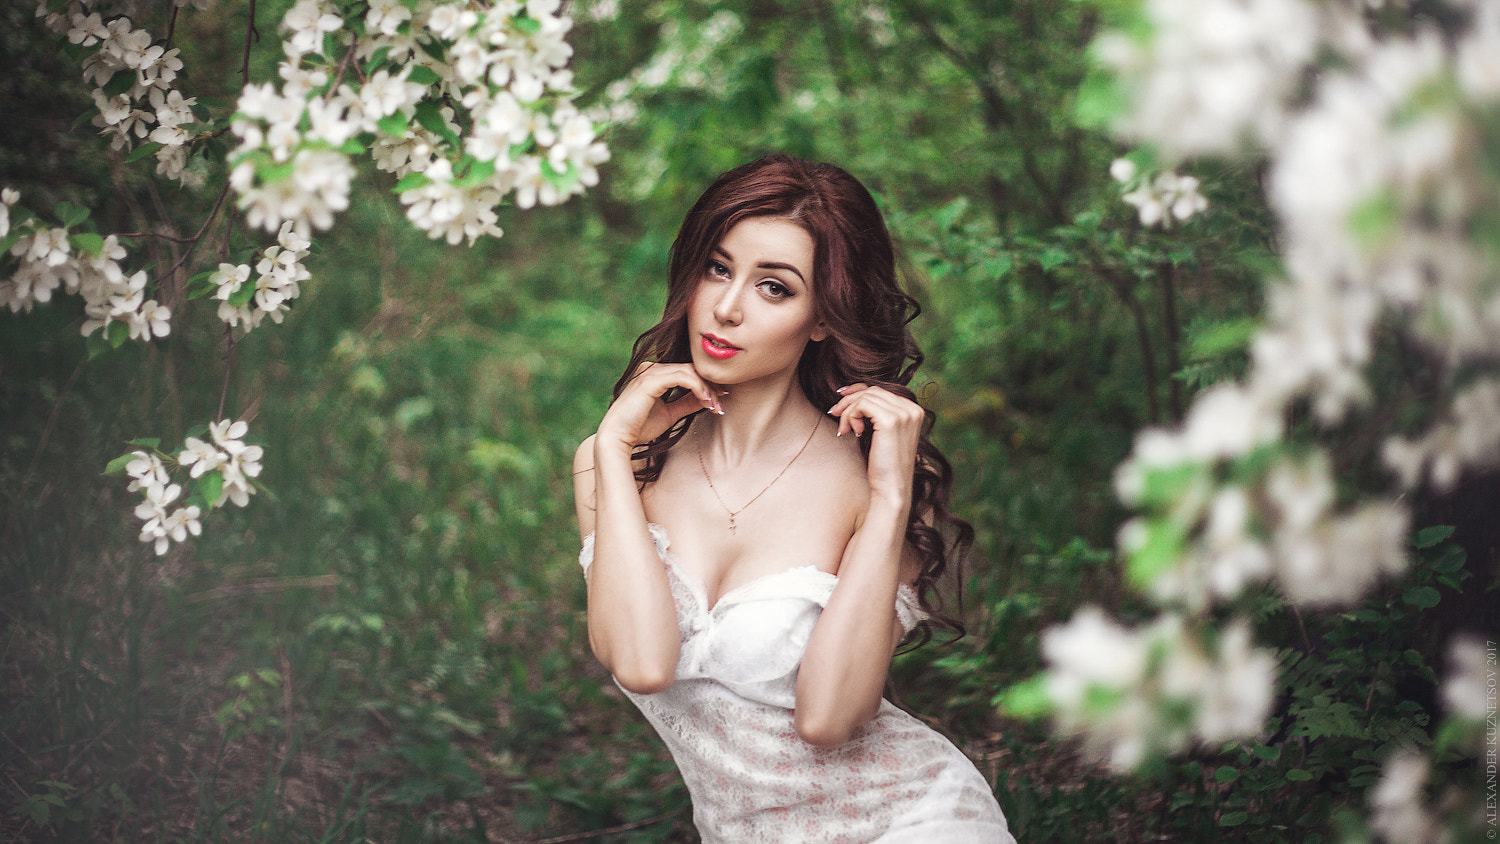 People 1500x844 Alexander Kuznetsov women long hair wavy hair makeup red lipstick necklace flowers cleavage white clothing model women outdoors brunette